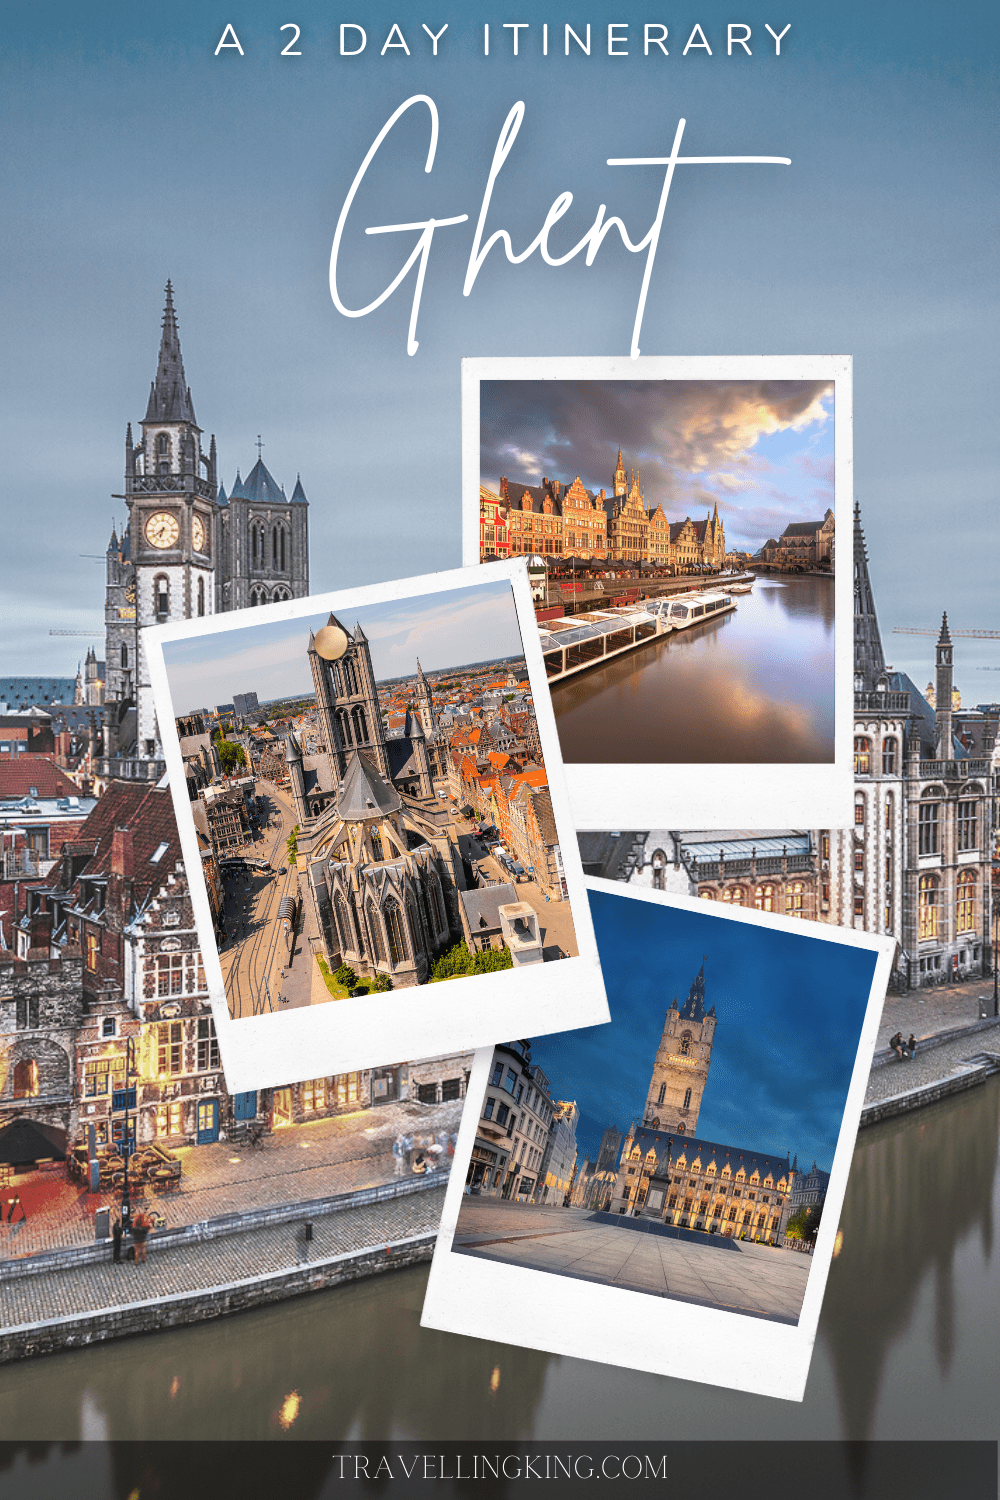 48 hours in Ghent - A 2 day Itinerary